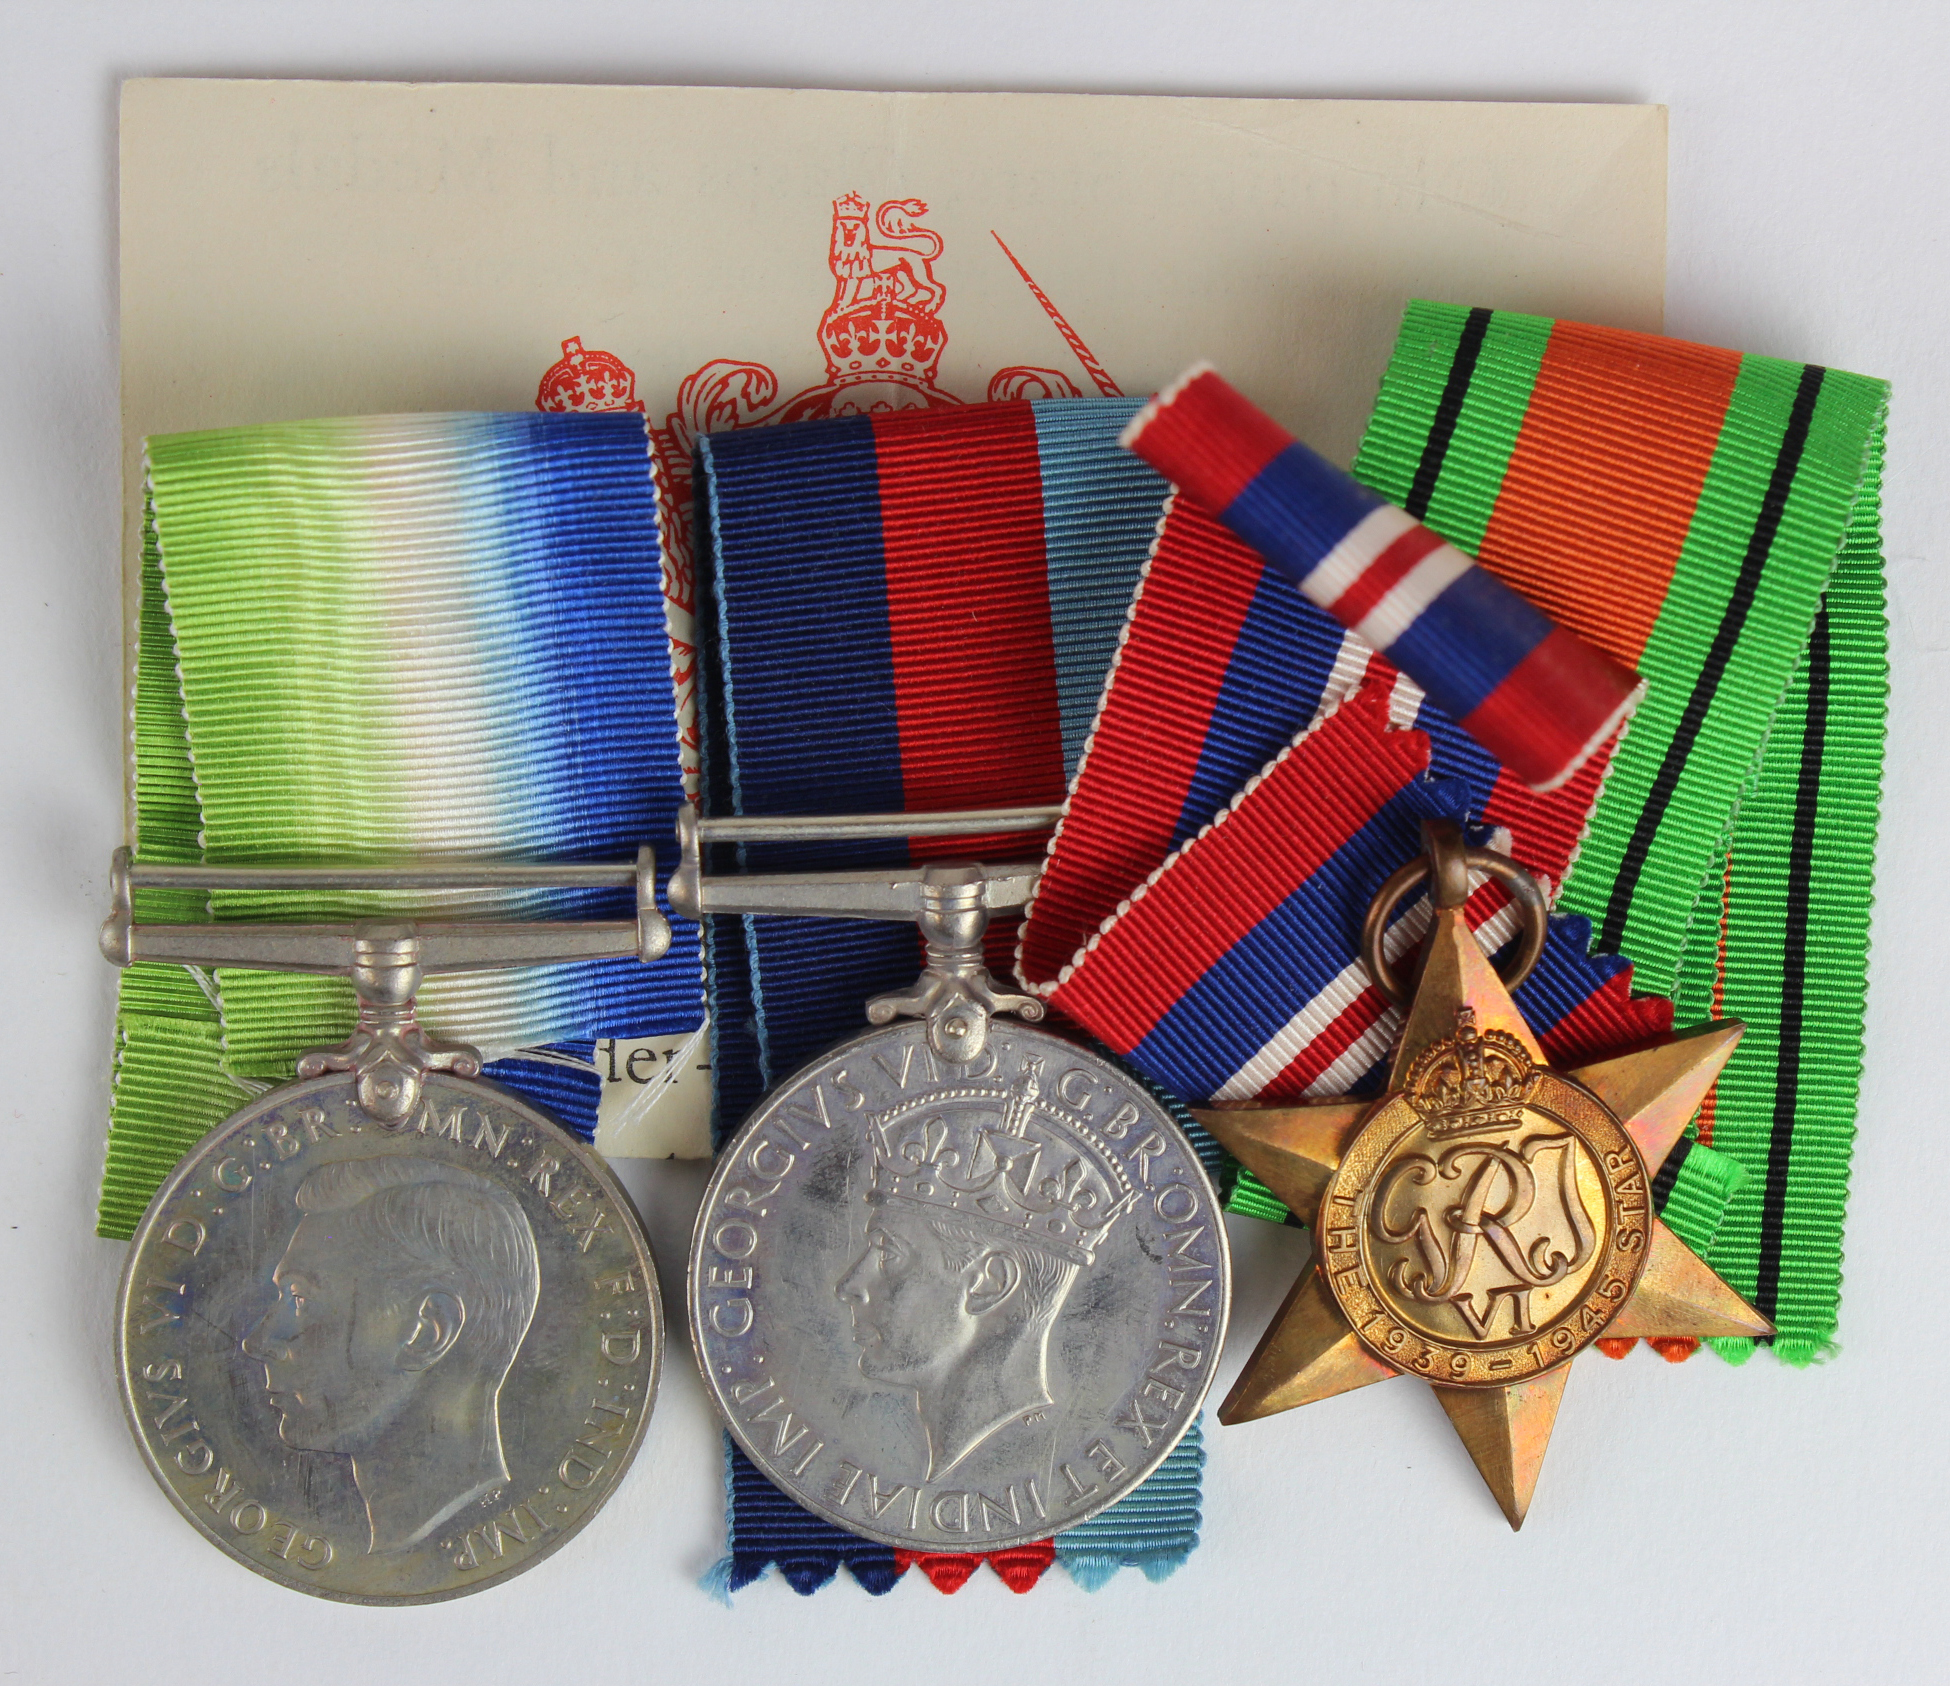 WW2 RAF medals in box of issue (most of address label removed). 1939-45 Star, Defence & War Medal.